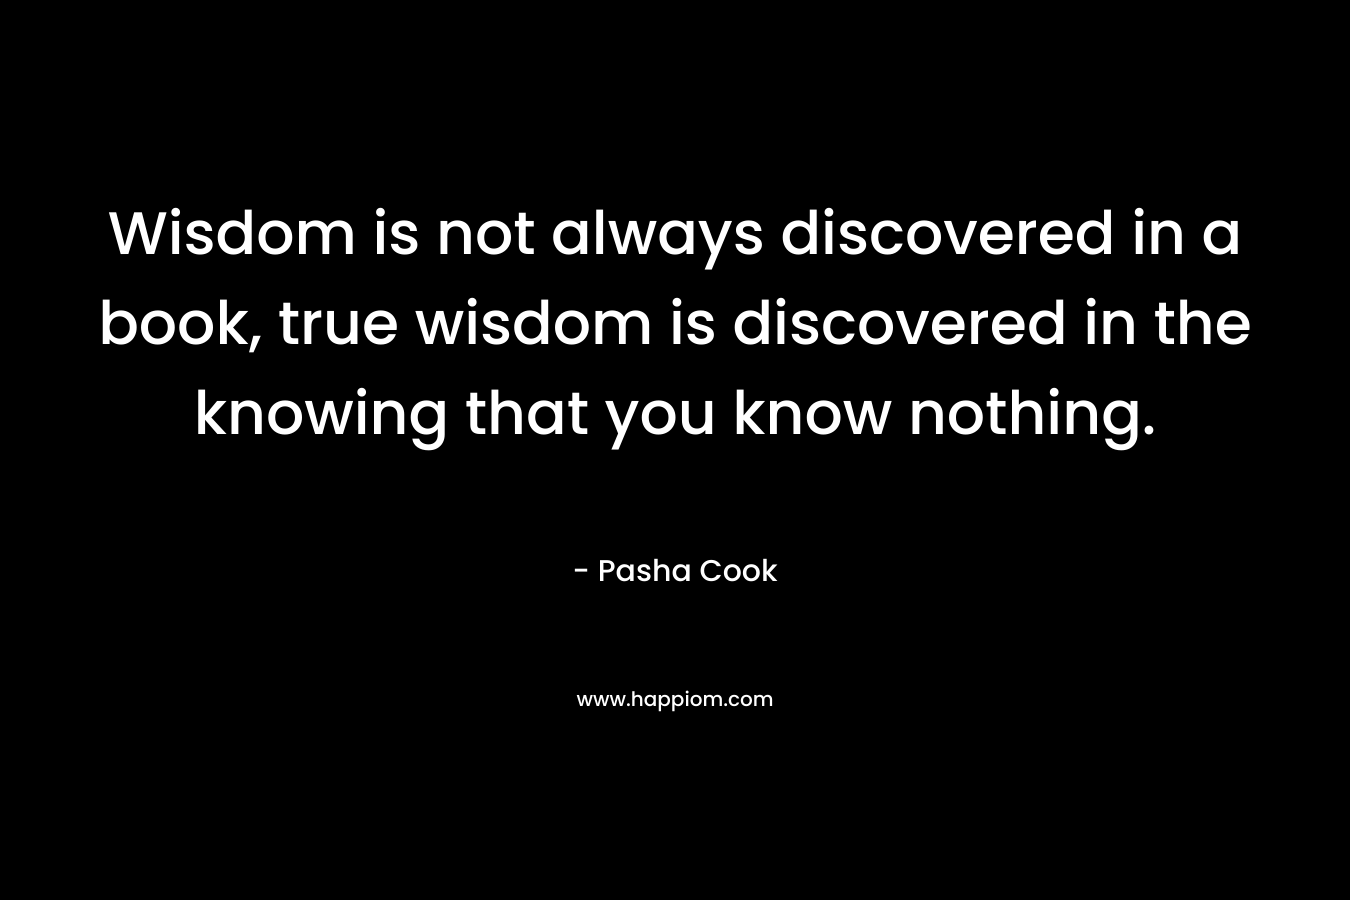 Wisdom is not always discovered in a book, true wisdom is discovered in the knowing that you know nothing. – Pasha Cook